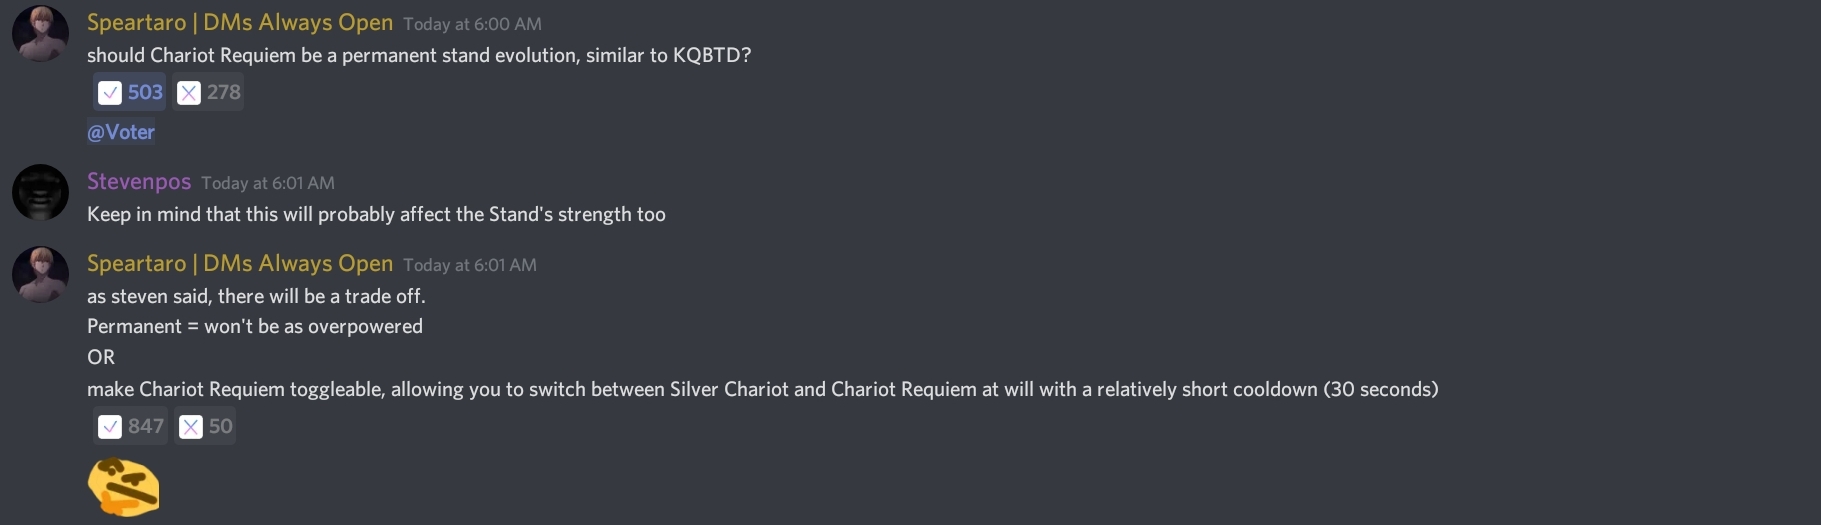 They Had A Poll About Chariot Requiem Fandom - roblox evolve discord